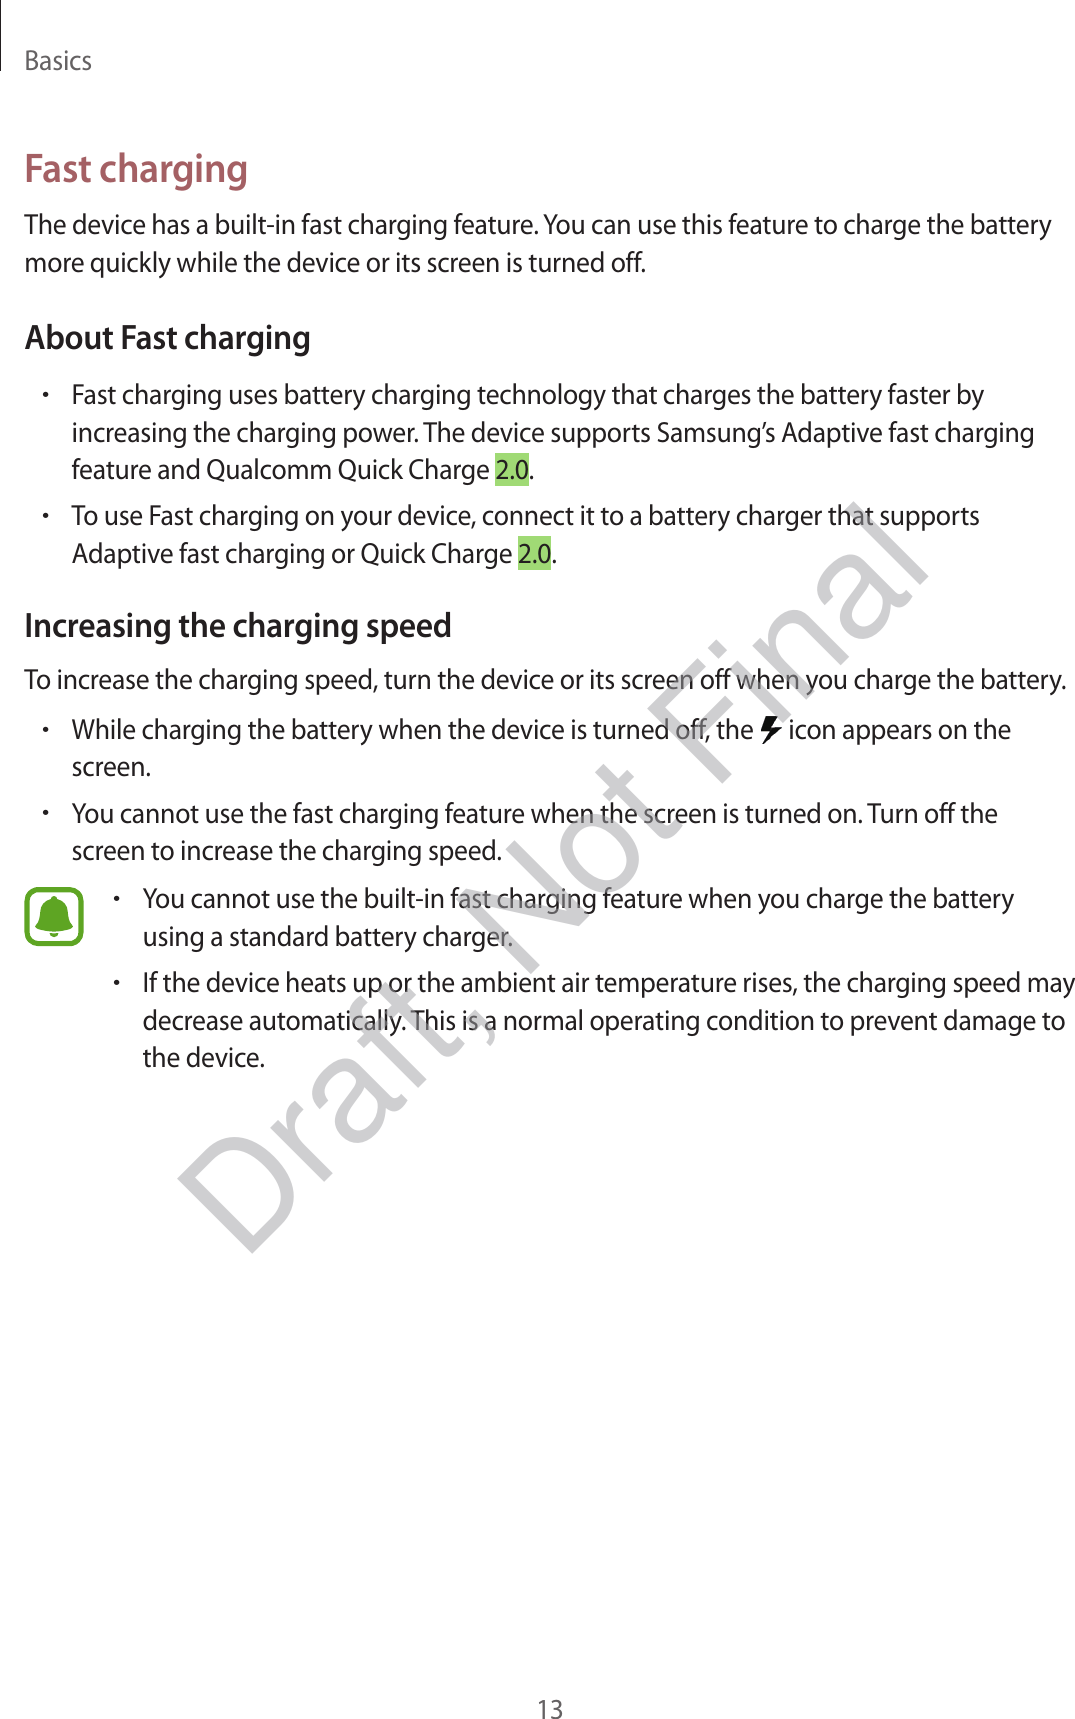 Basics13Fast chargingThe device has a built-in fast charging feature. You can use this feature to charge the battery more quickly while the device or its screen is turned off.About Fast charging•Fast charging uses battery charging technology that charges the battery faster by increasing the charging power. The device supports Samsung’s Adaptive fast charging feature and Qualcomm Quick Charge 2.0.•To use Fast charging on your device, connect it to a battery charger that supports Adaptive fast charging or Quick Charge 2.0.Increasing the charging speedTo increase the charging speed, turn the device or its screen off when you charge the battery.•While charging the battery when the device is turned off, the   icon appears on the screen.•You cannot use the fast charging feature when the screen is turned on. Turn off the screen to increase the charging speed.•You cannot use the built-in fast charging feature when you charge the battery using a standard battery charger.•If the device heats up or the ambient air temperature rises, the charging speed may decrease automatically. This is a normal operating condition to prevent damage to the device.Draft, Not Final